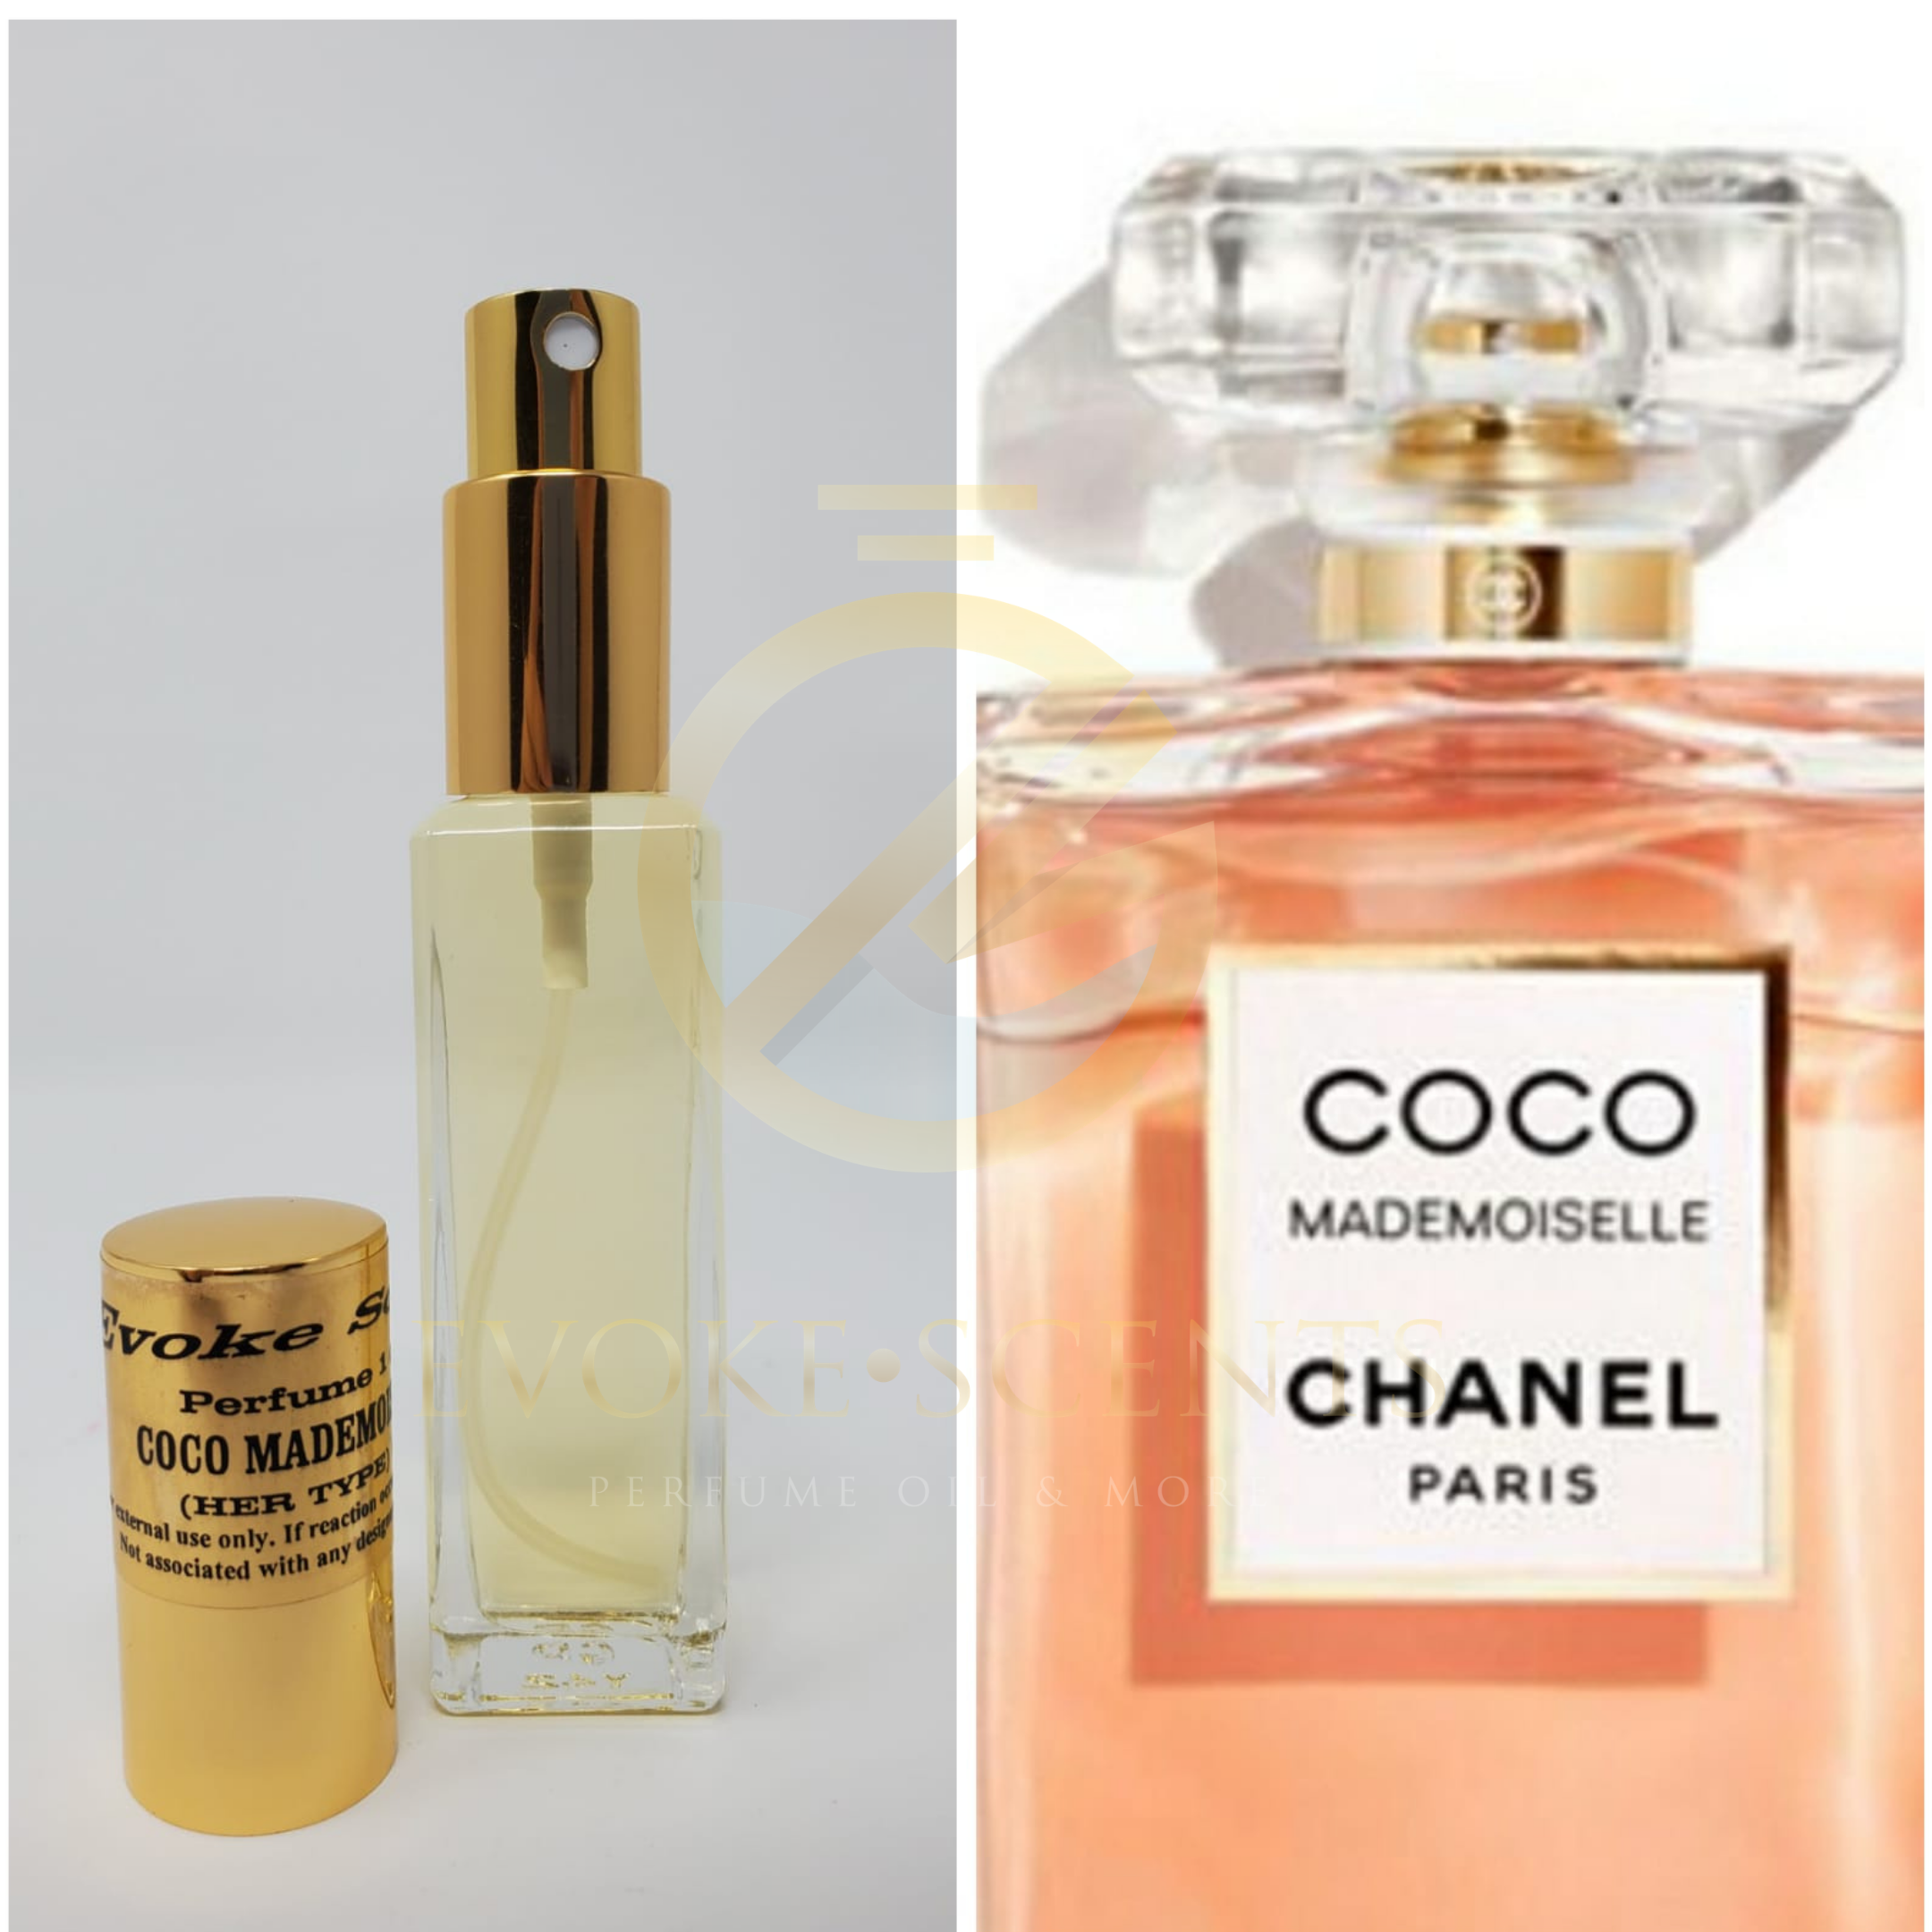 COCO MADEMOISELLE - CHANEL